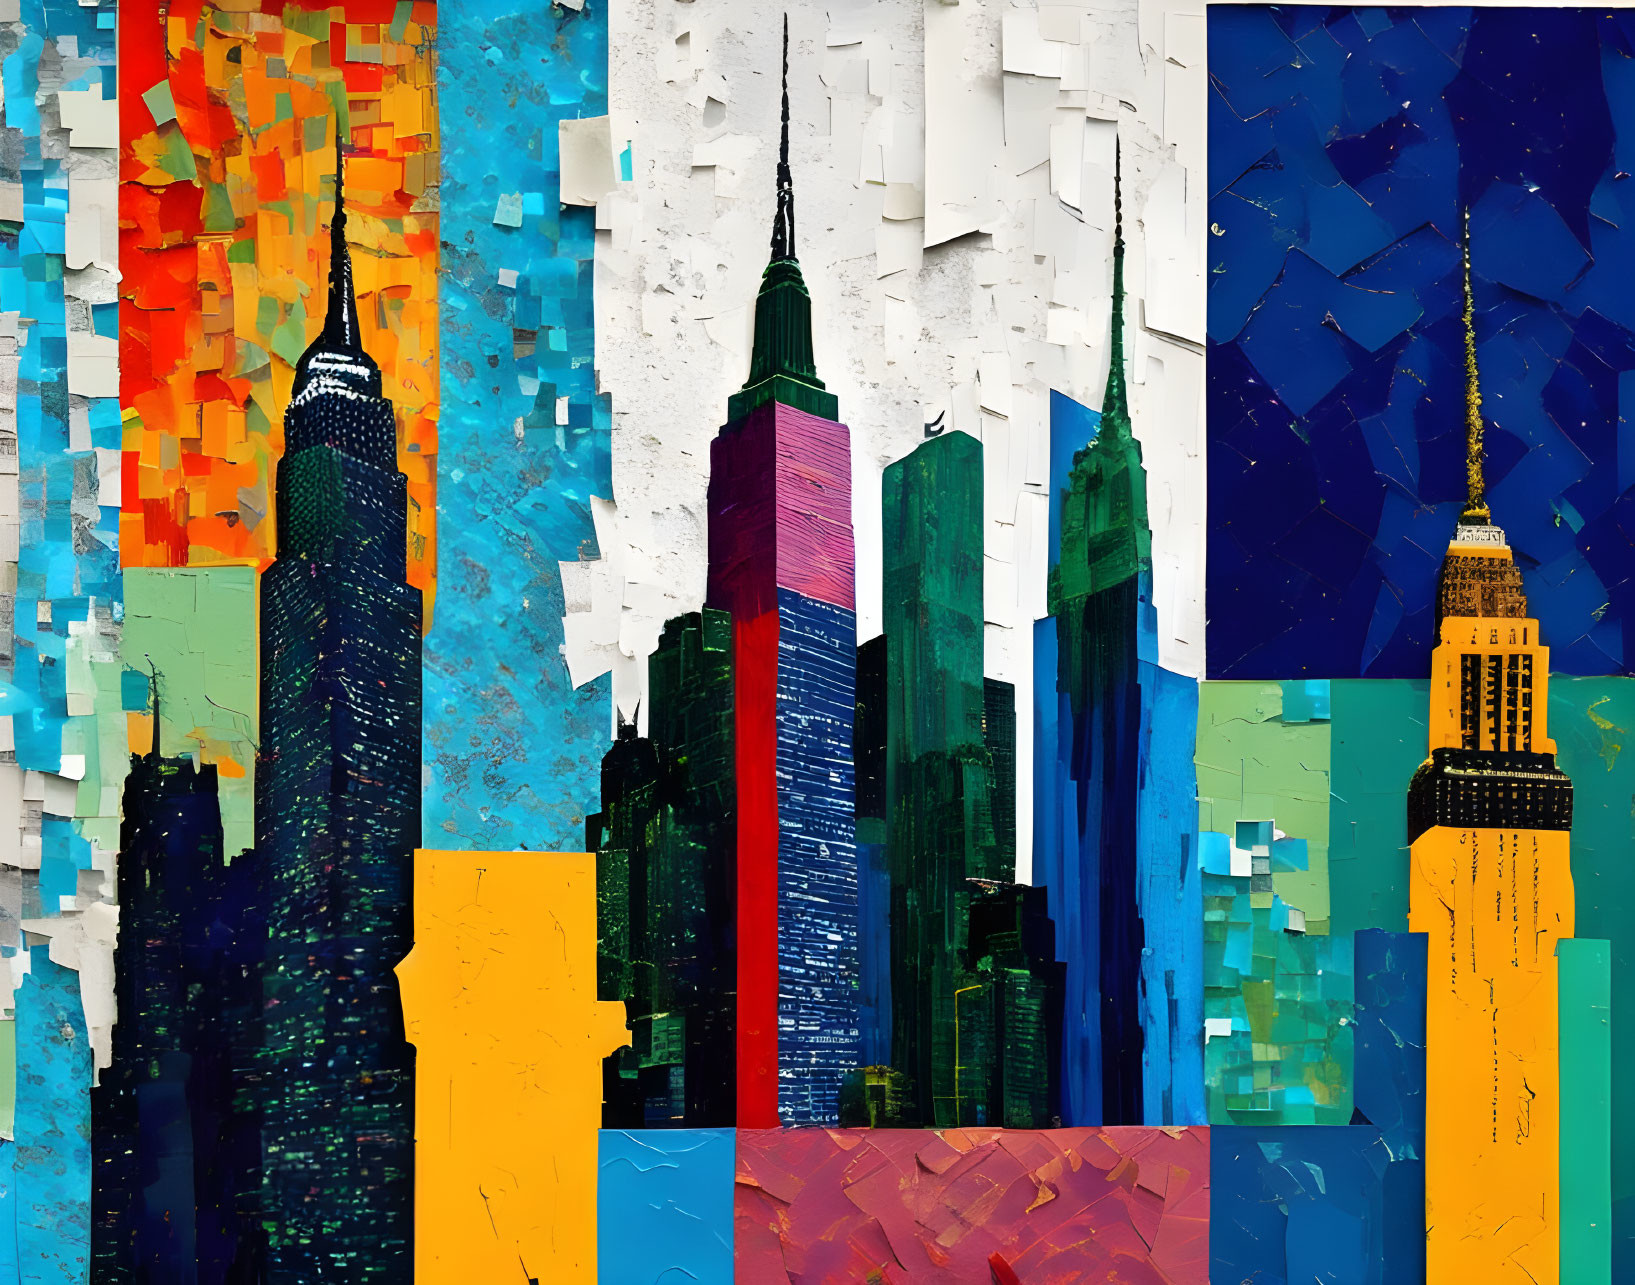 Vibrant abstract NYC skyline collage with Empire State Building in fragmented style